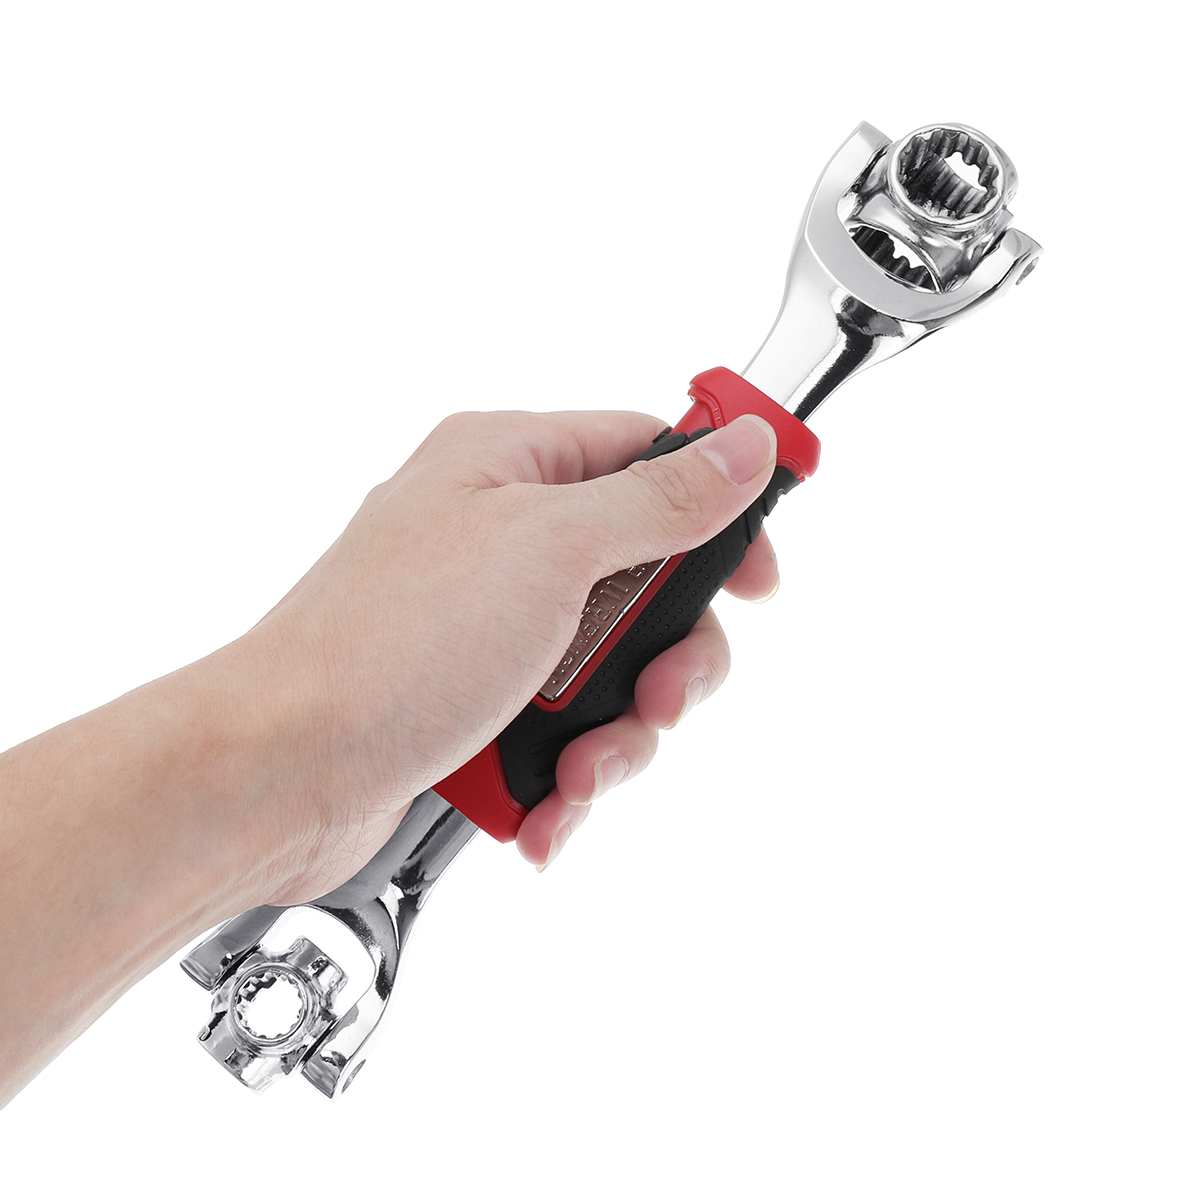 48 in 1 Multifunctional Wrench for Spline Bolts All Size Torx 360° Socket Tools Auto Repair 21